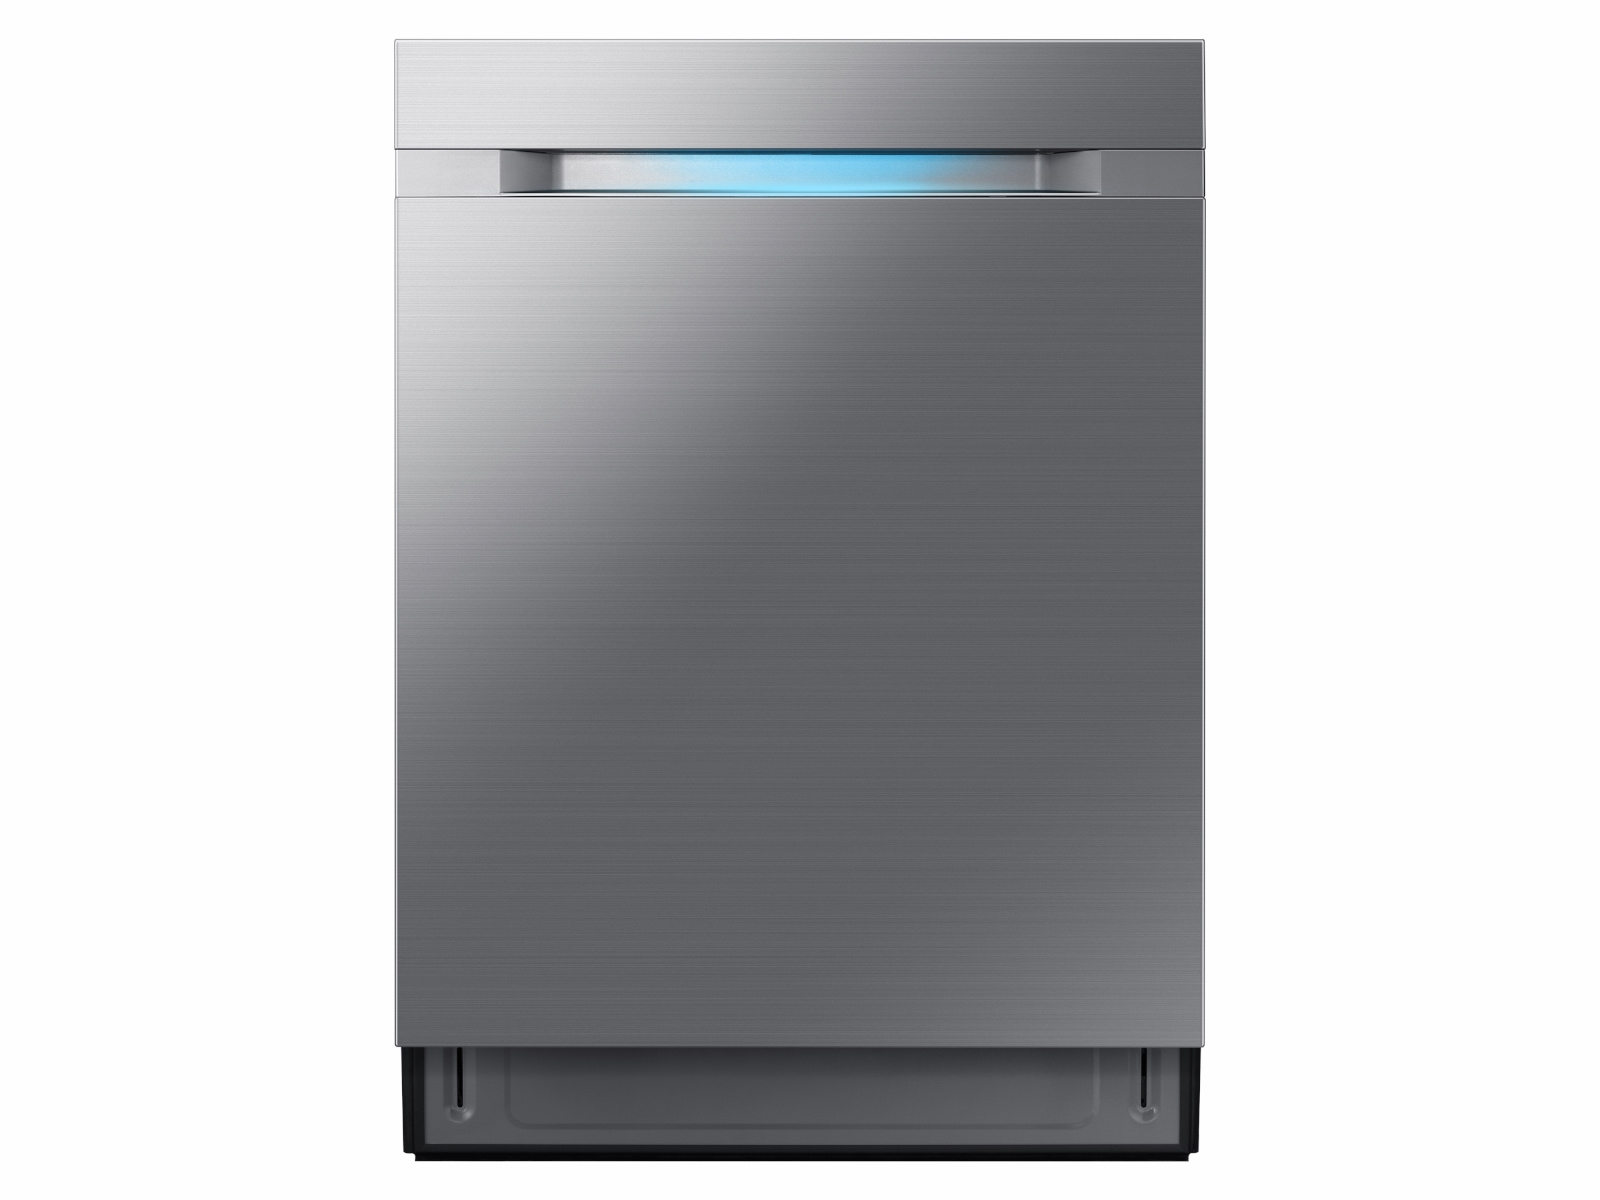 DW80M9990US in Stainless Steel by Samsung in Key West, FL - Chef Collection  Dishwasher with Hidden Touch Controls in Stainless Steel